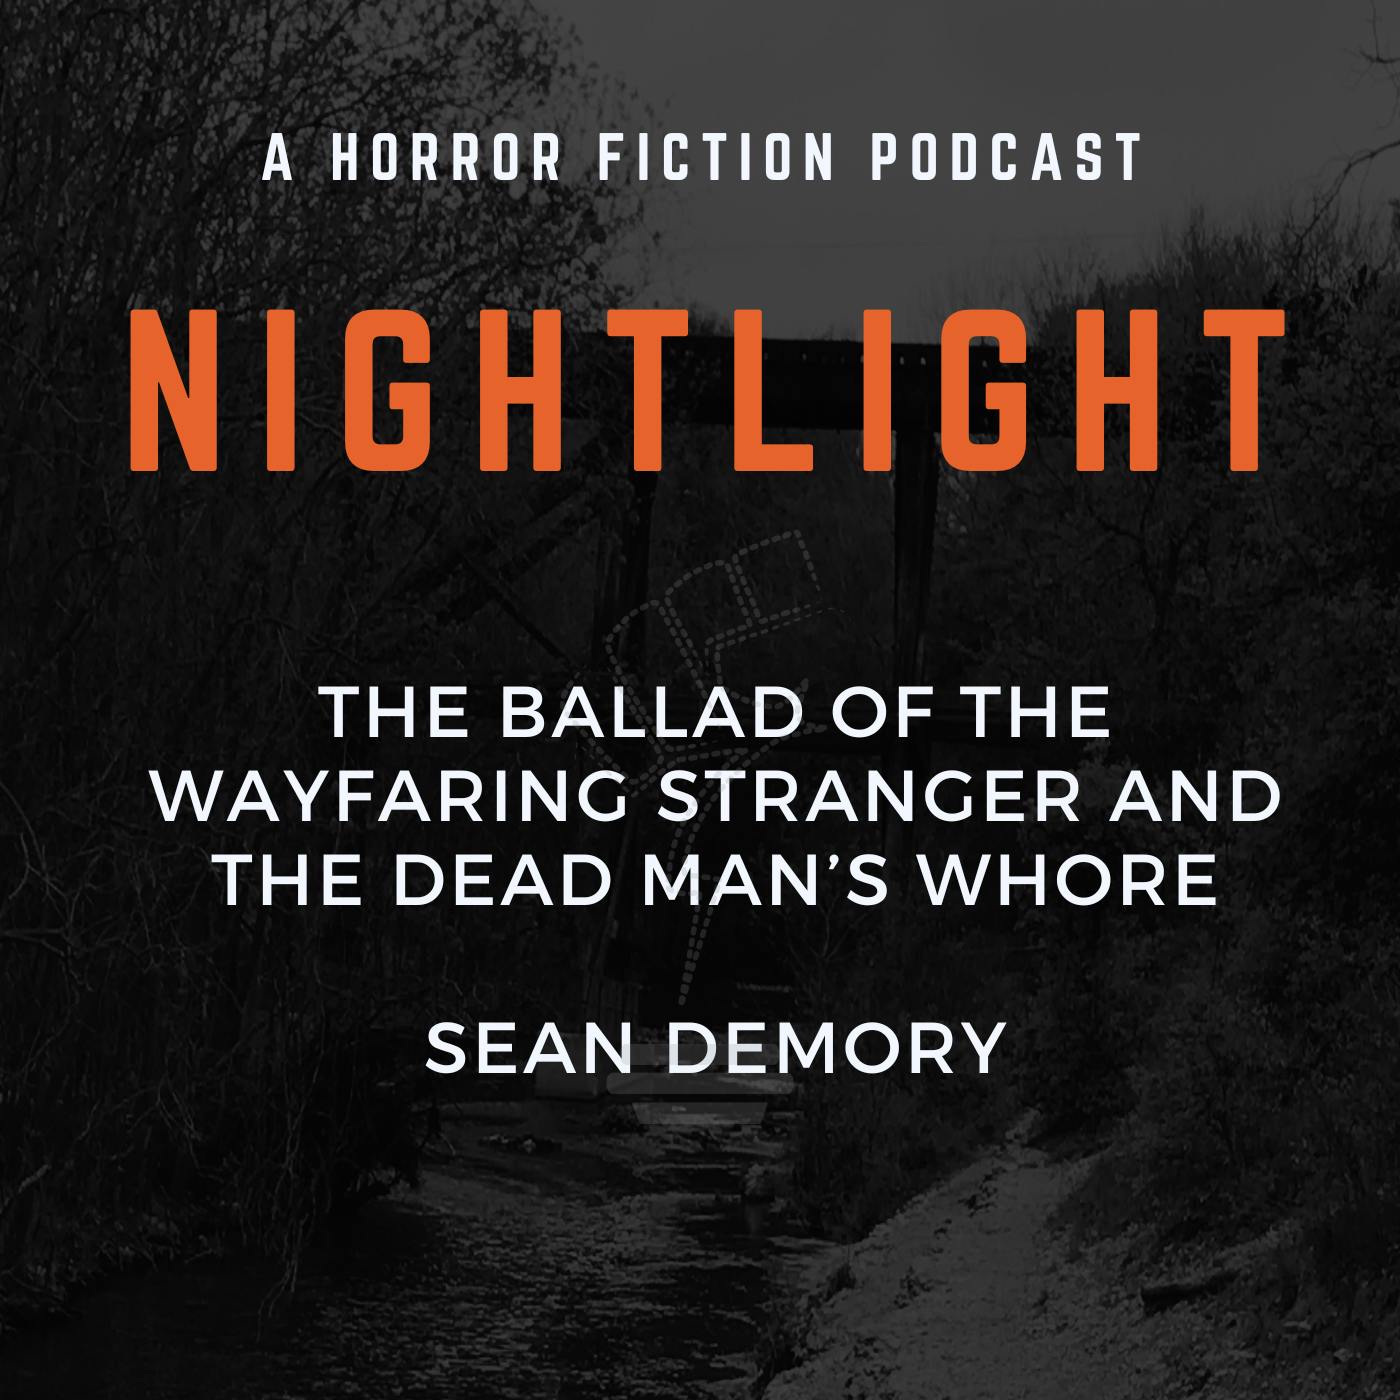 627: The Ballad of the Wayfaring Stranger and the Dead Man’s Whore by Sean Demory